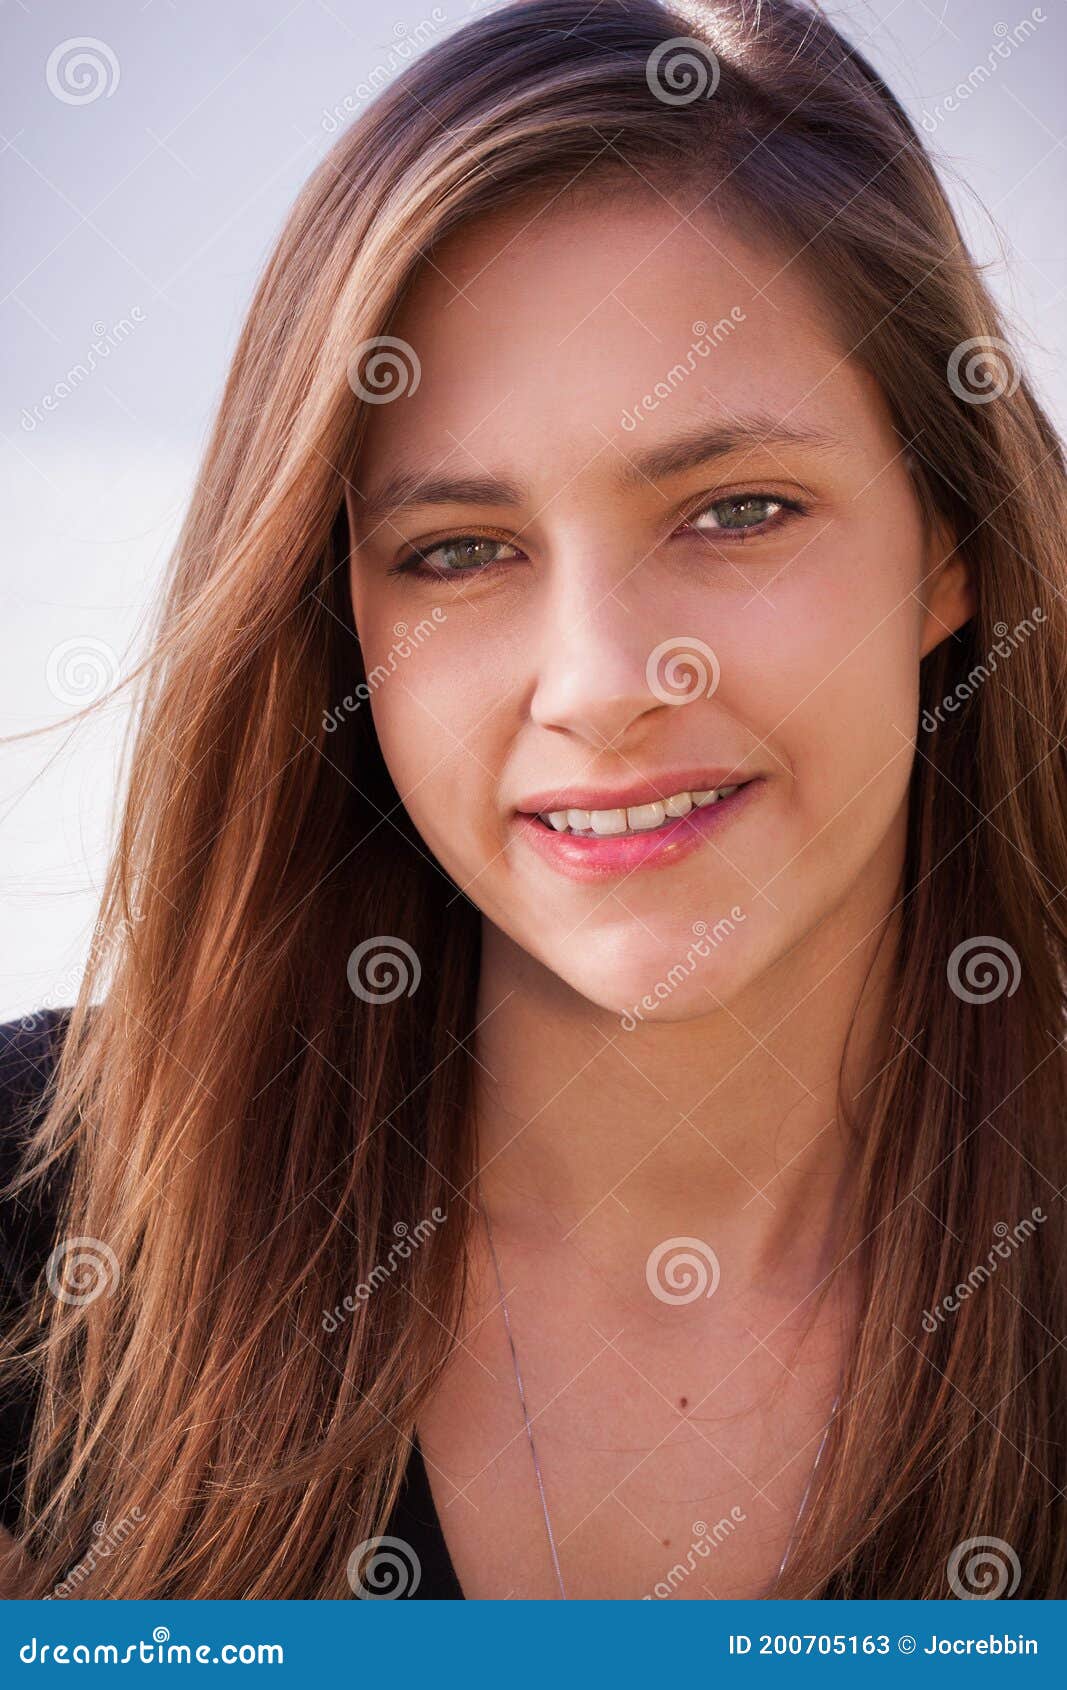 Youthful Beautiful Teenager With Long Brown Hair Stock Image Image Of